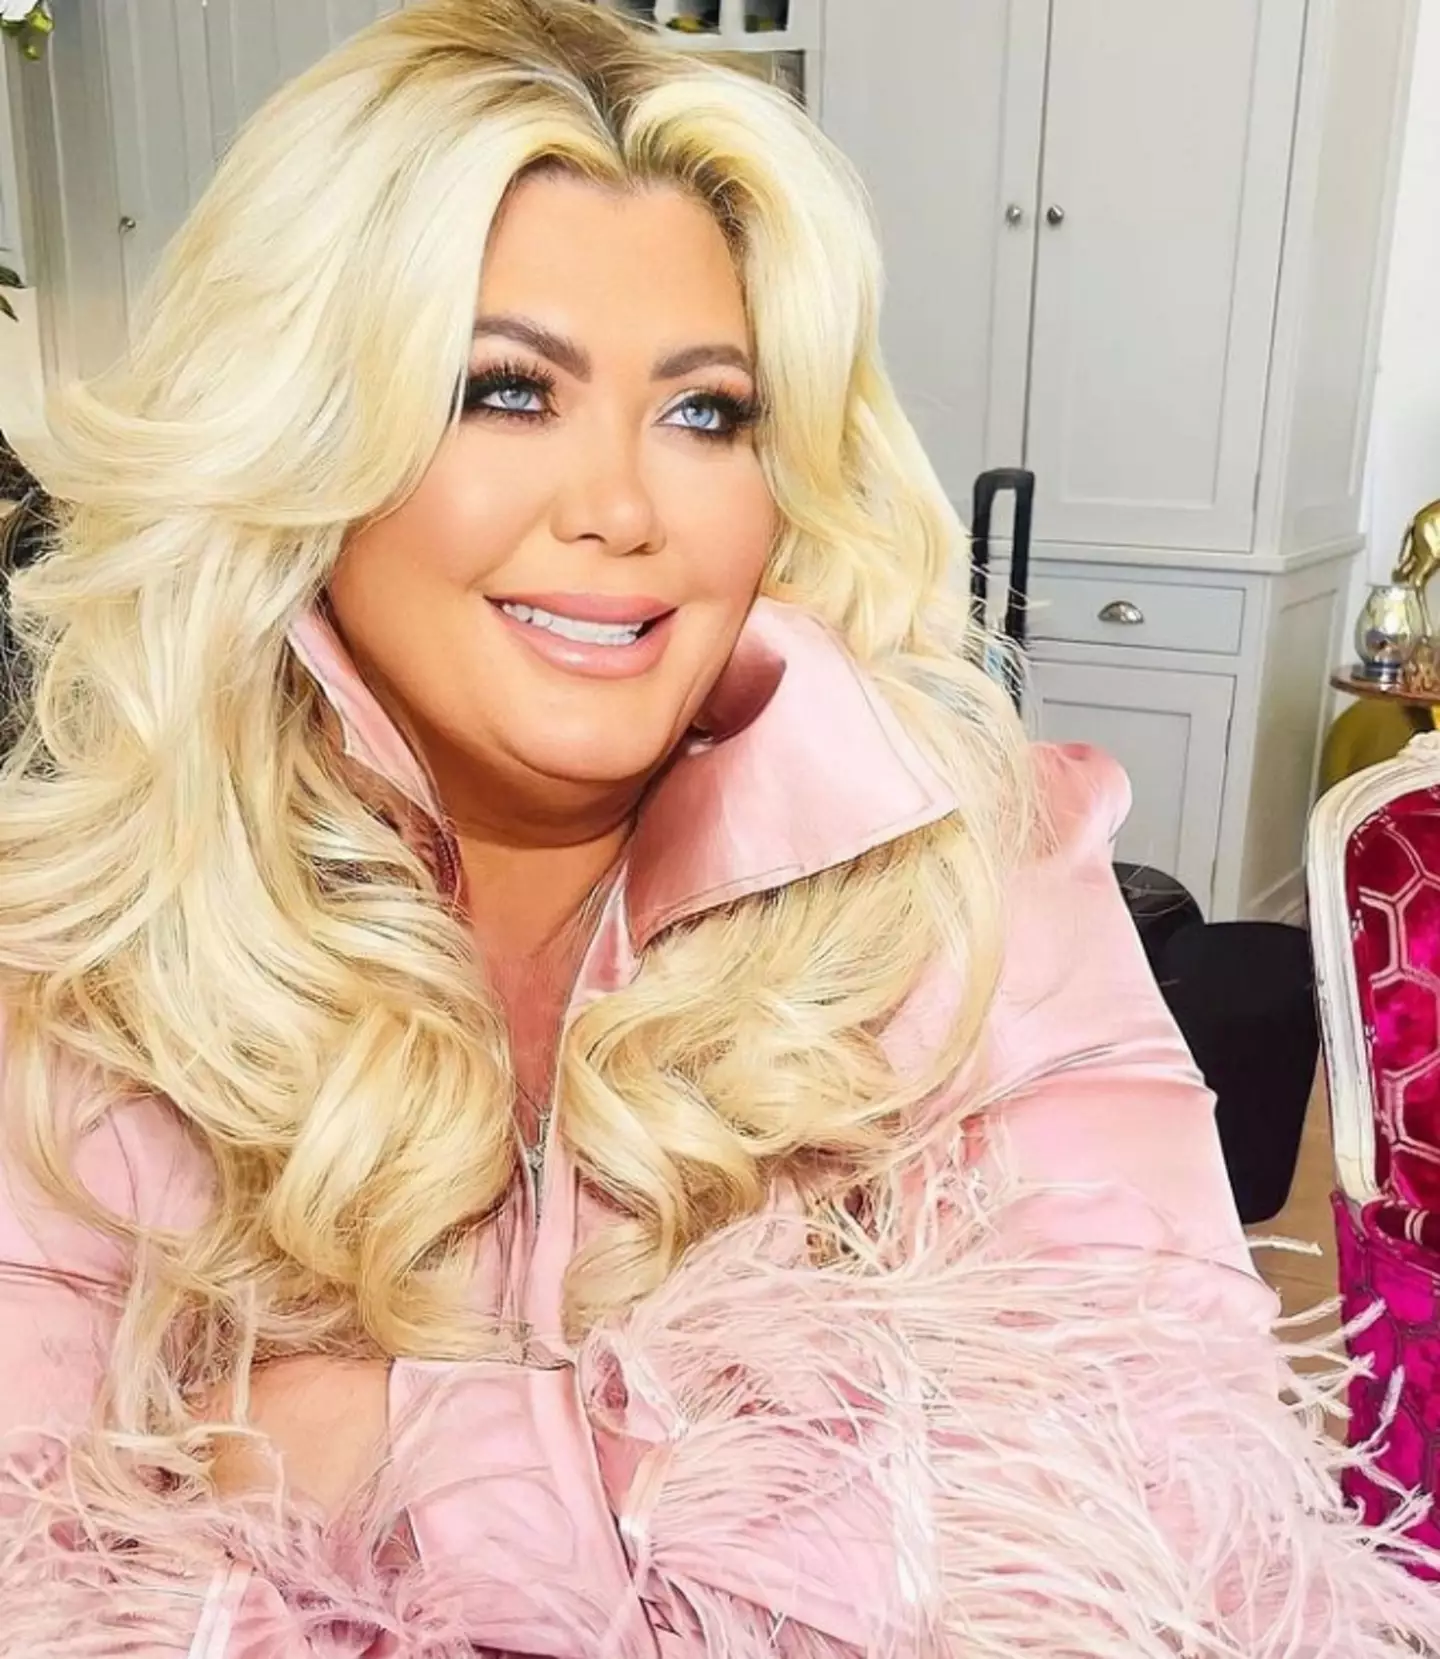 Gemma Collins is pumping the brakes on her wedding.